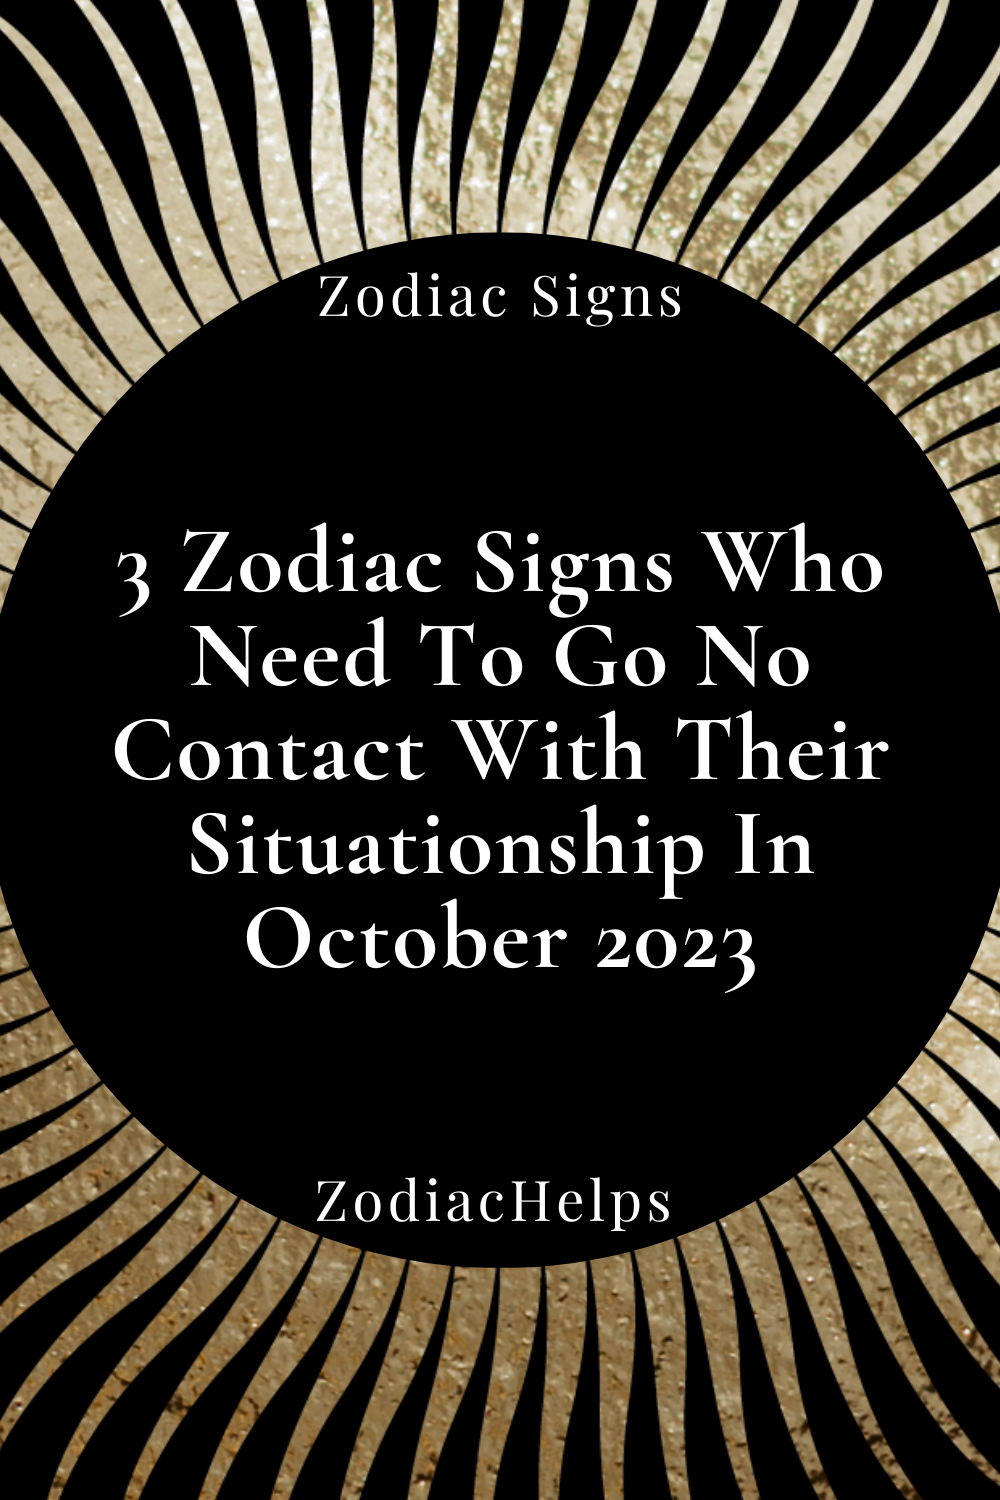 3 Zodiac Signs Who Need To Go No Contact With Their Situationship In October 2023